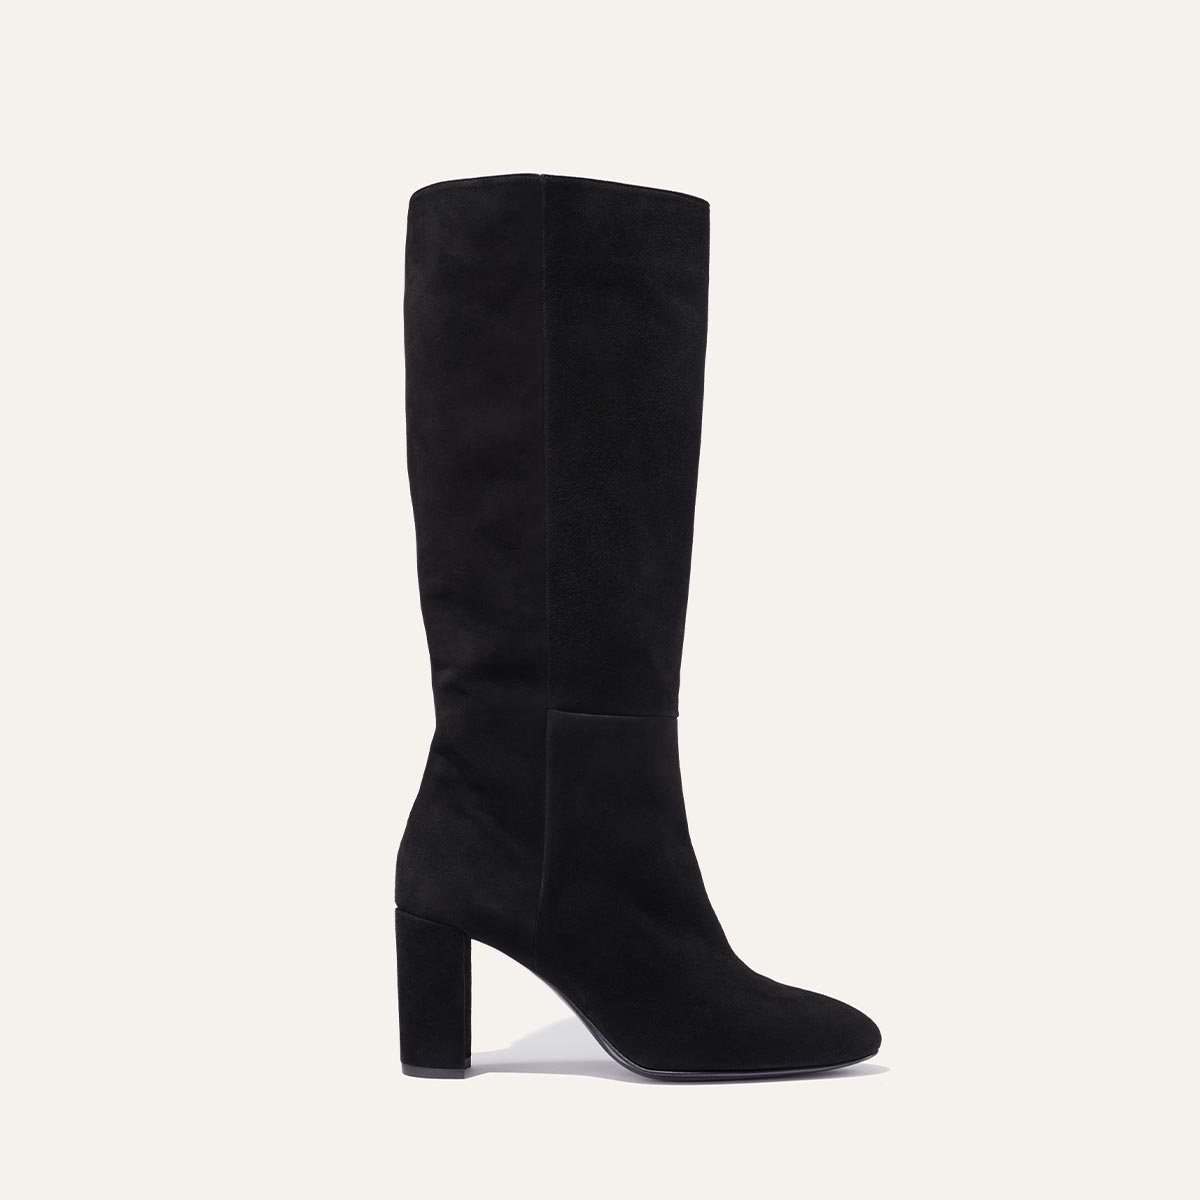 Margaux's knee-high Bleecker Boot in soft, black Italian suede with walkable heel and almond-shaped toe